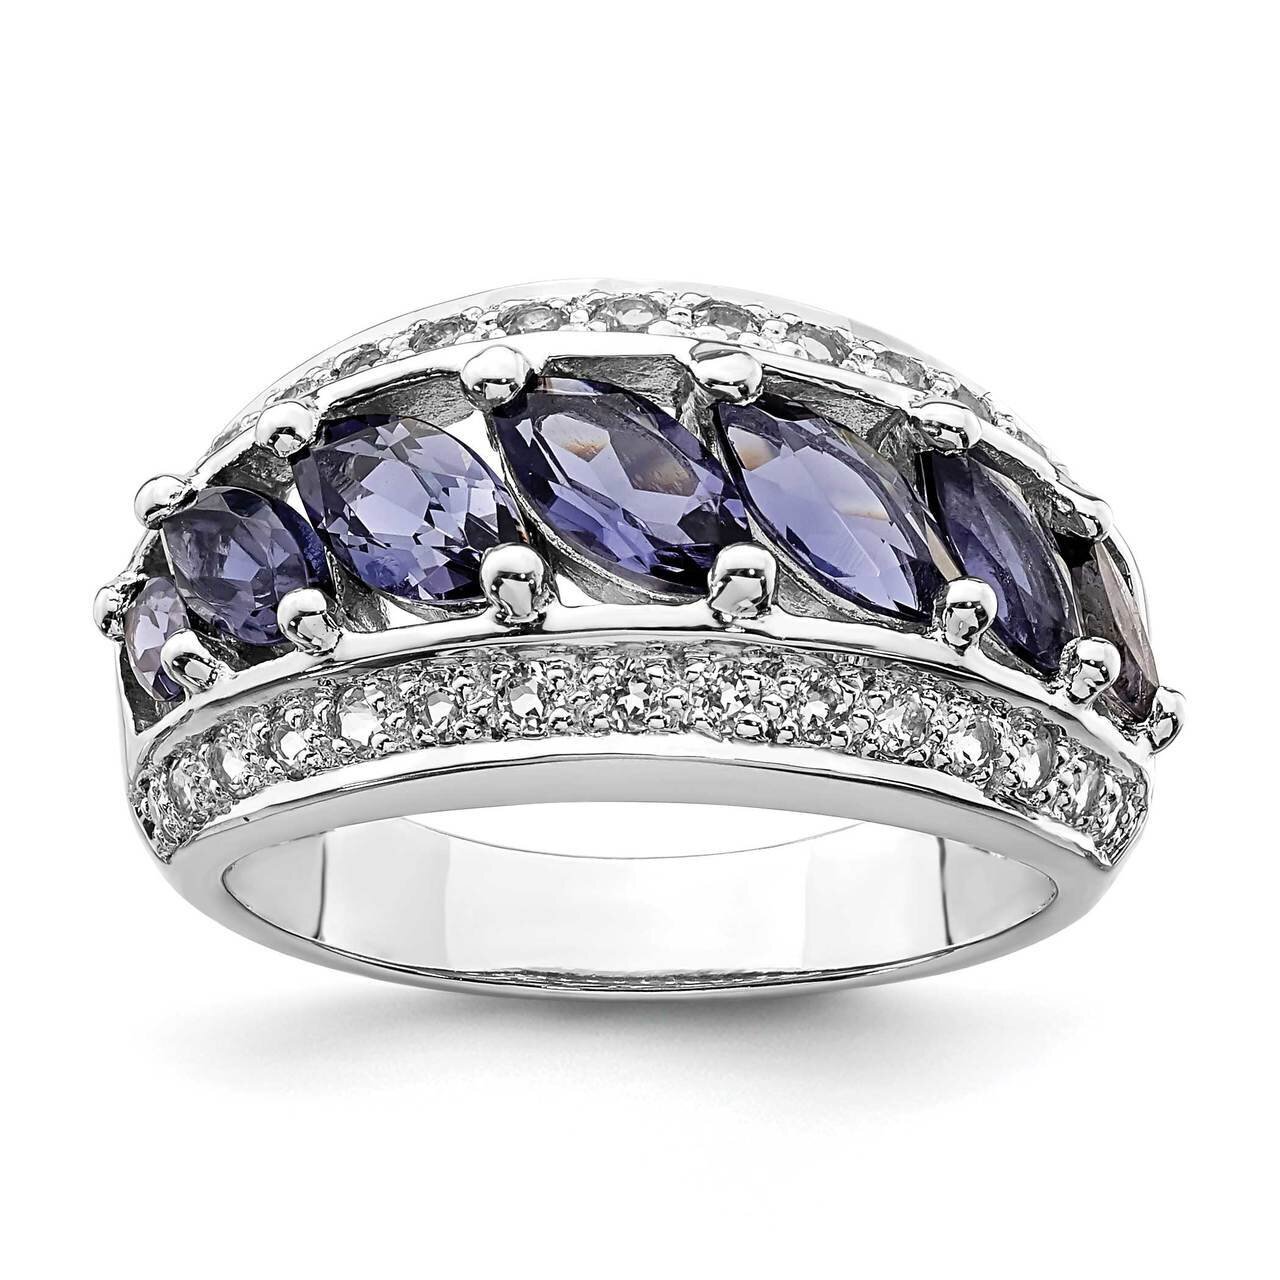 Marquise Iolite/Wht Topaz 7-stone Ring Sterling Silver Rhodium-plated QR7051